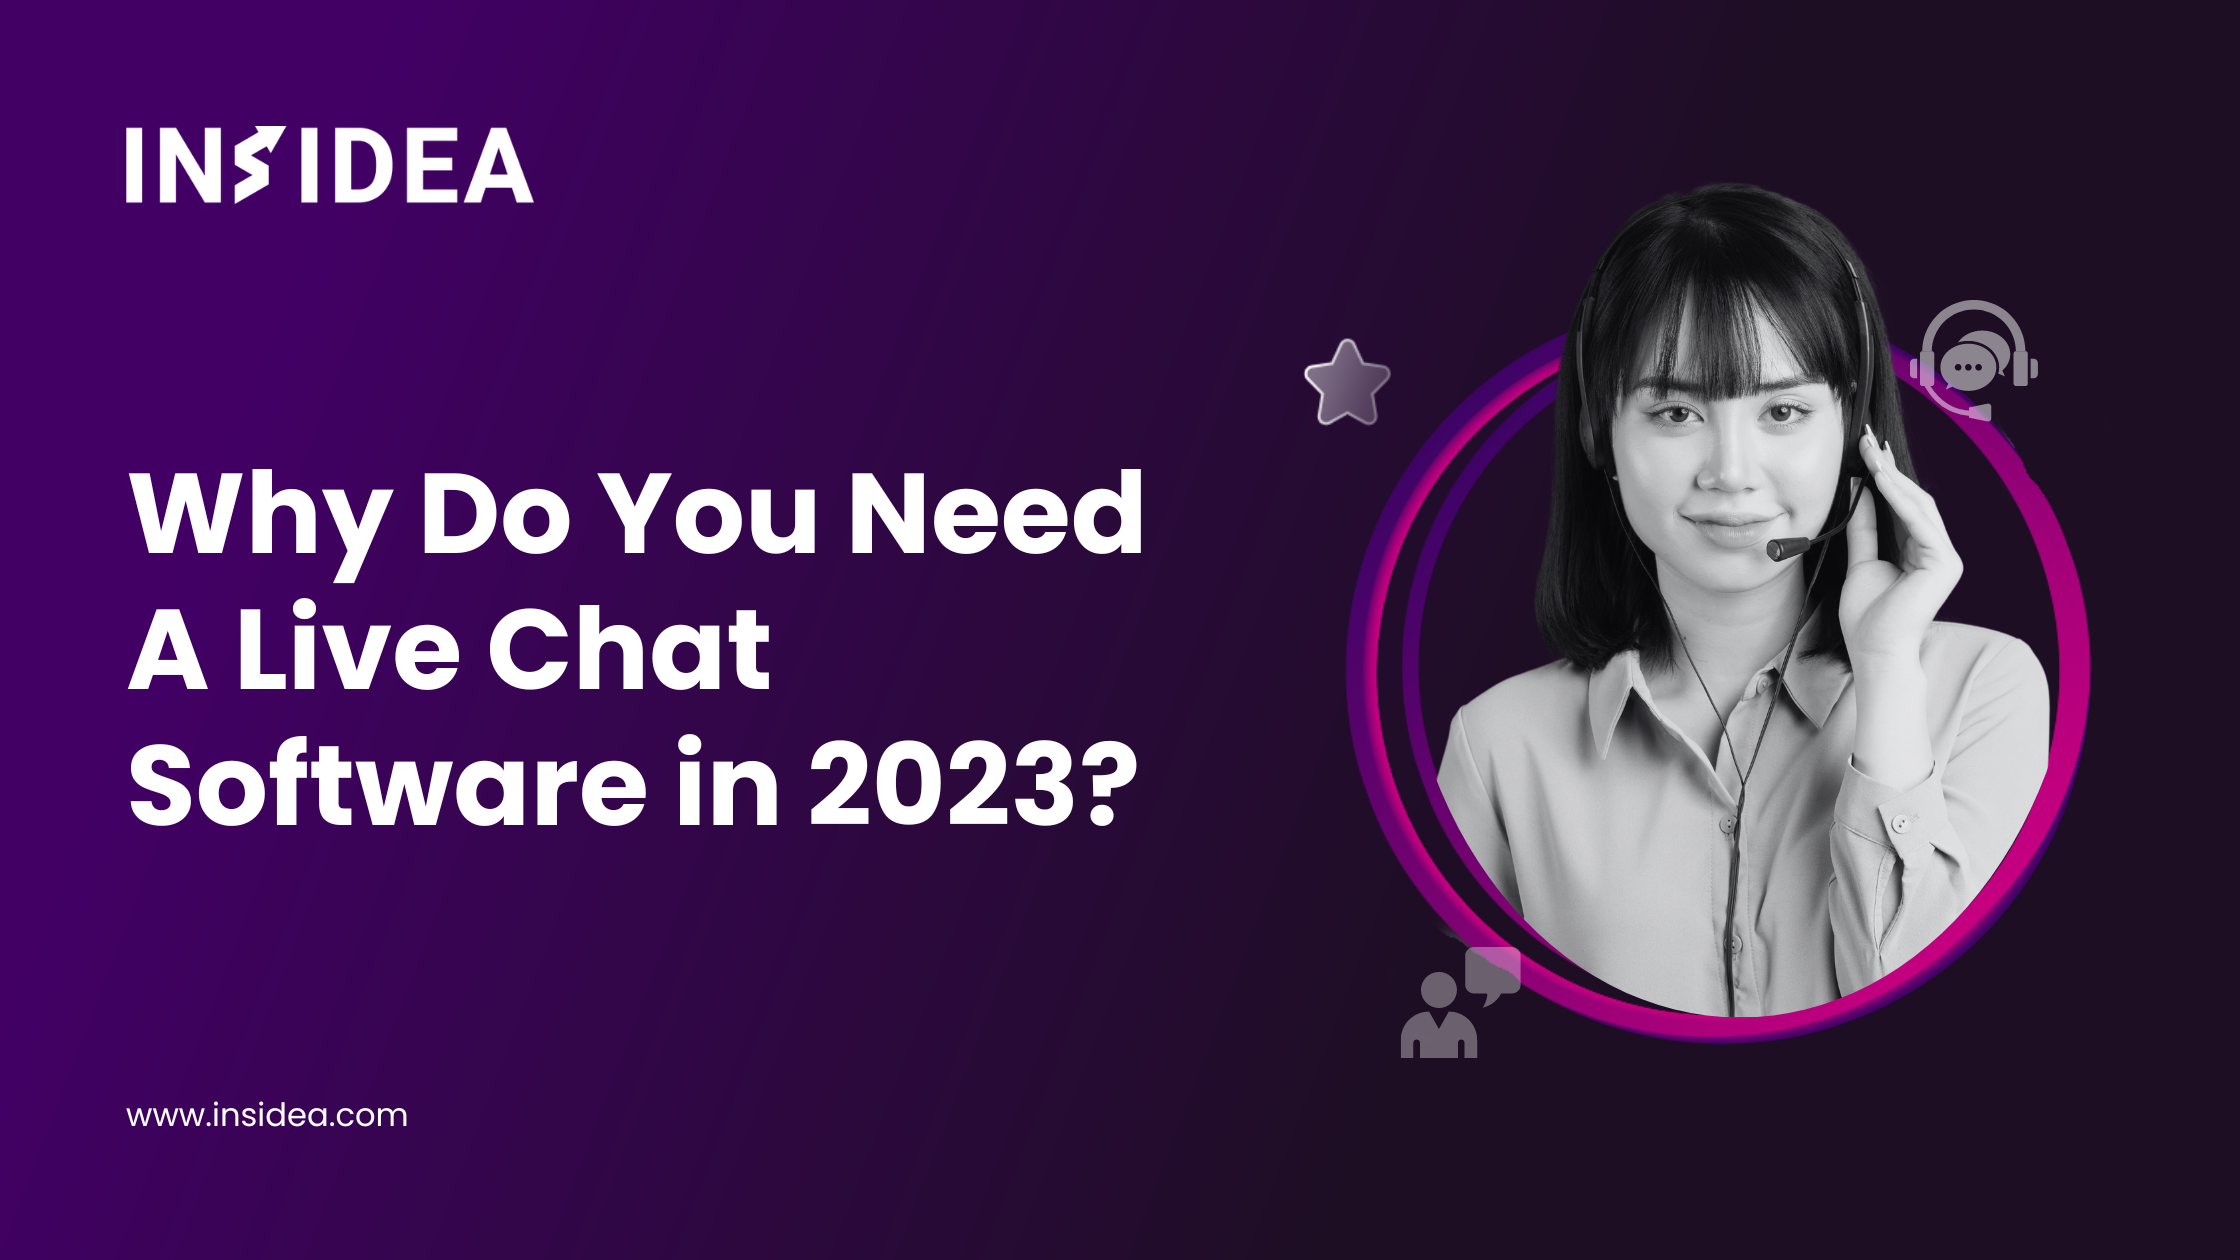 Why Do You Need A Live Chat Software in 2023?